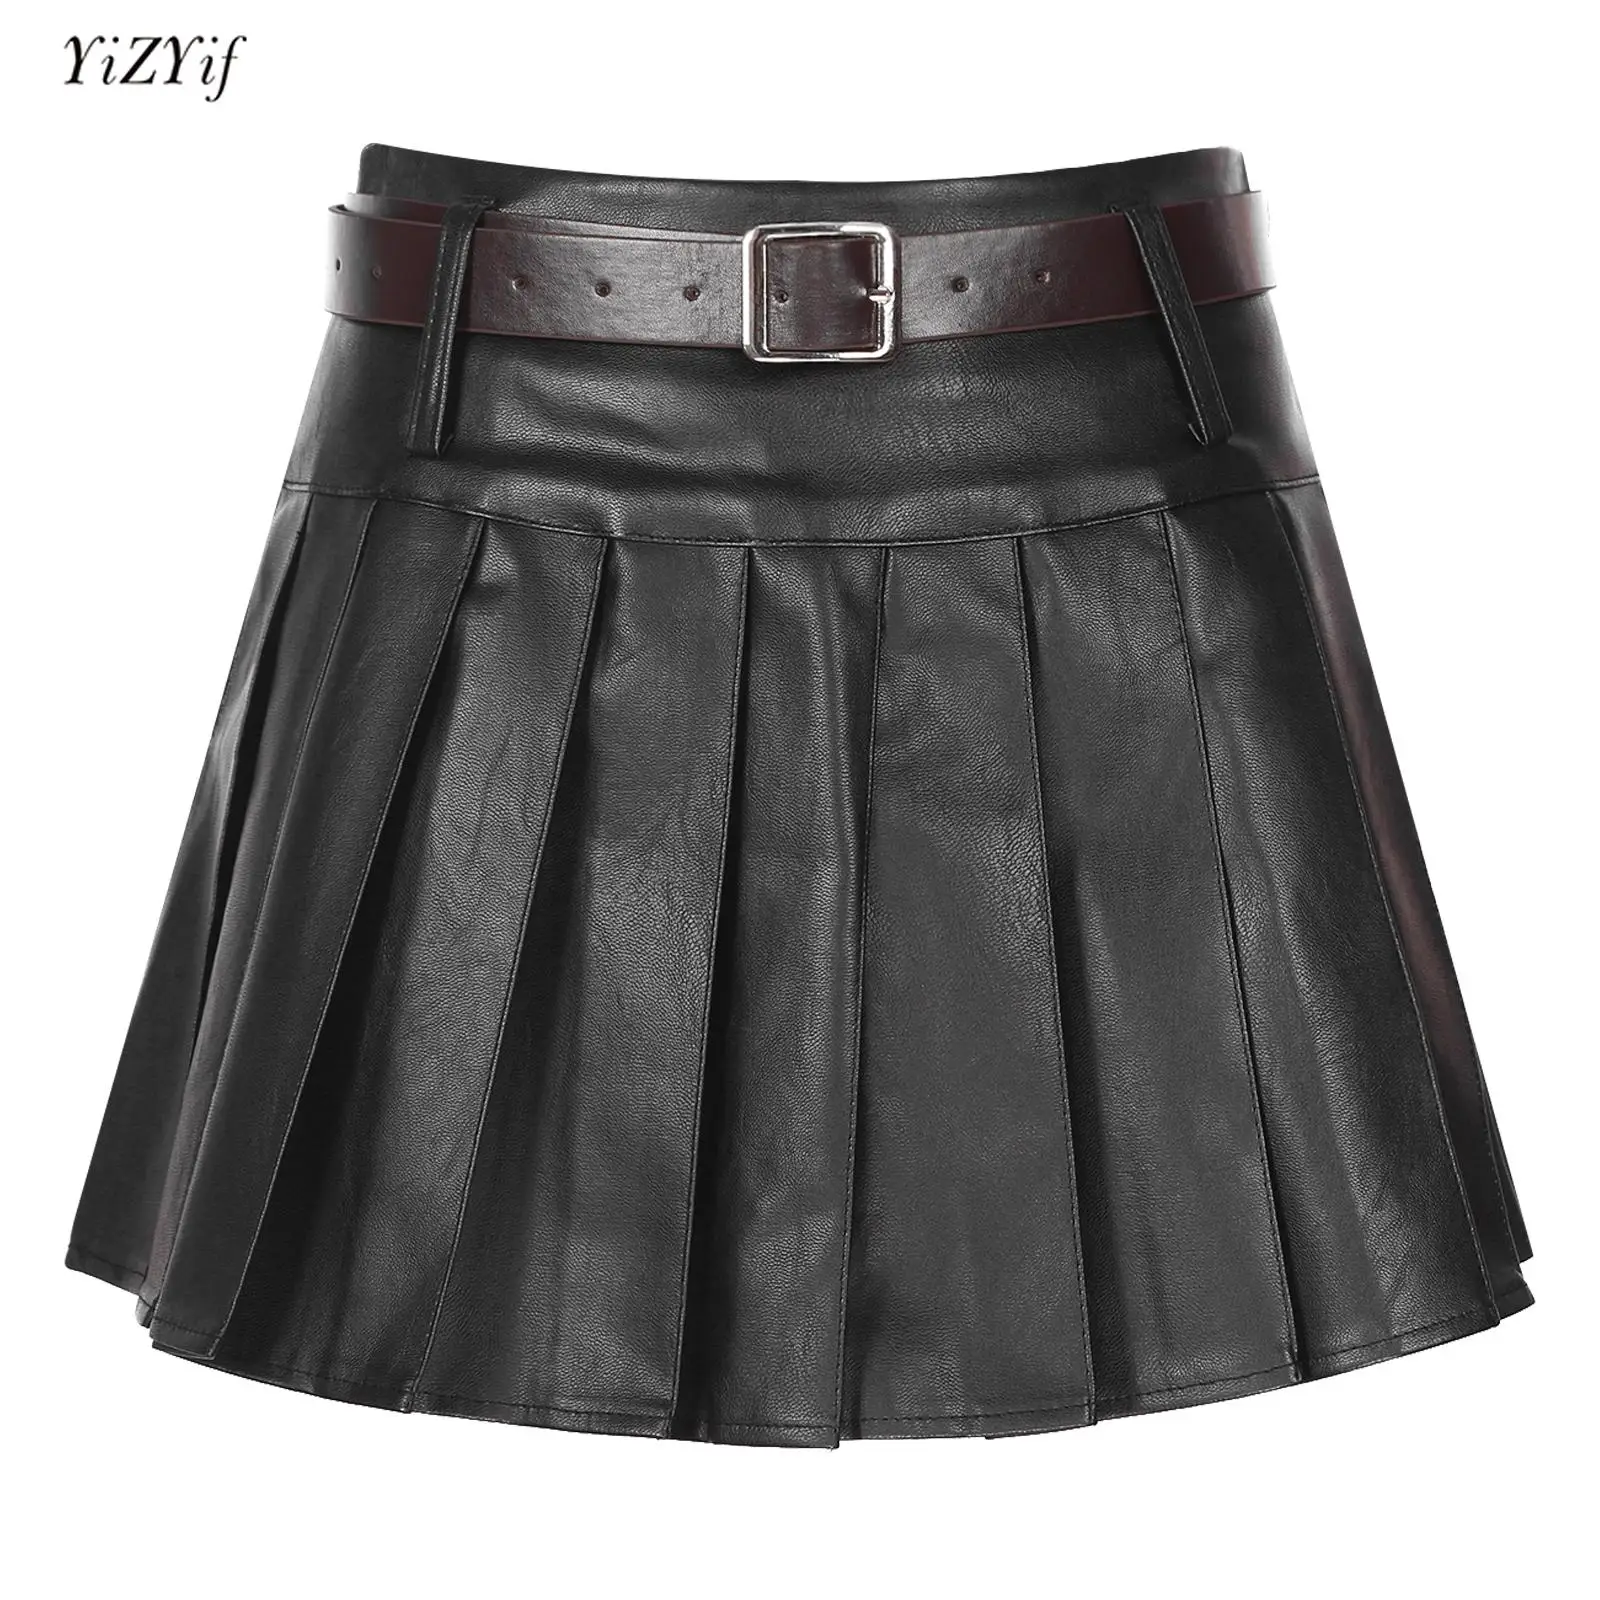 Womens Faux Leather Pleated Skirt Fashion Clubwear High Waist Built-in Shorts Skirts with Adjustable Belt Party Street Dancewear adult waist belt with full sequins pu leather belt for street culture enthusiast